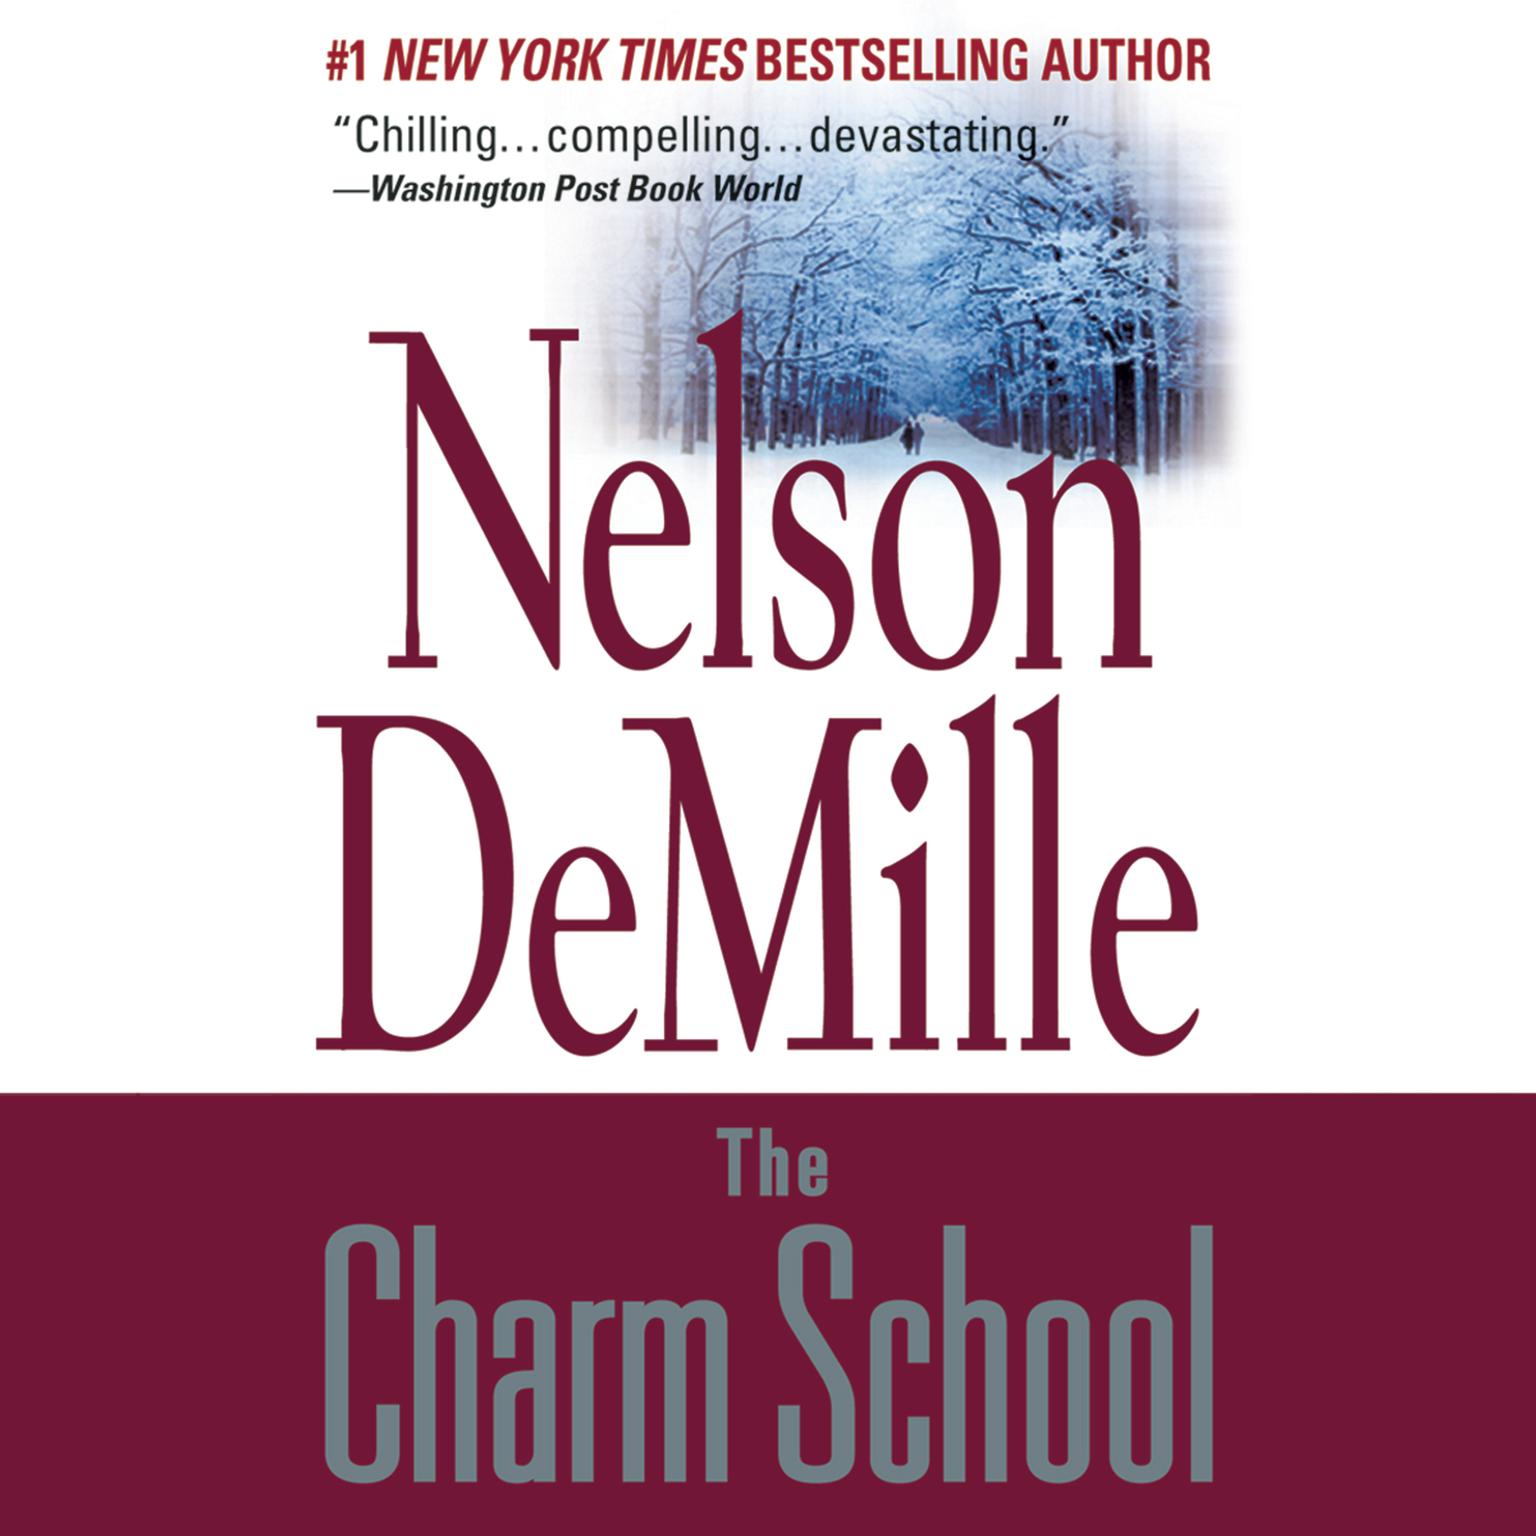 The Charm School Audiobook, by Nelson DeMille